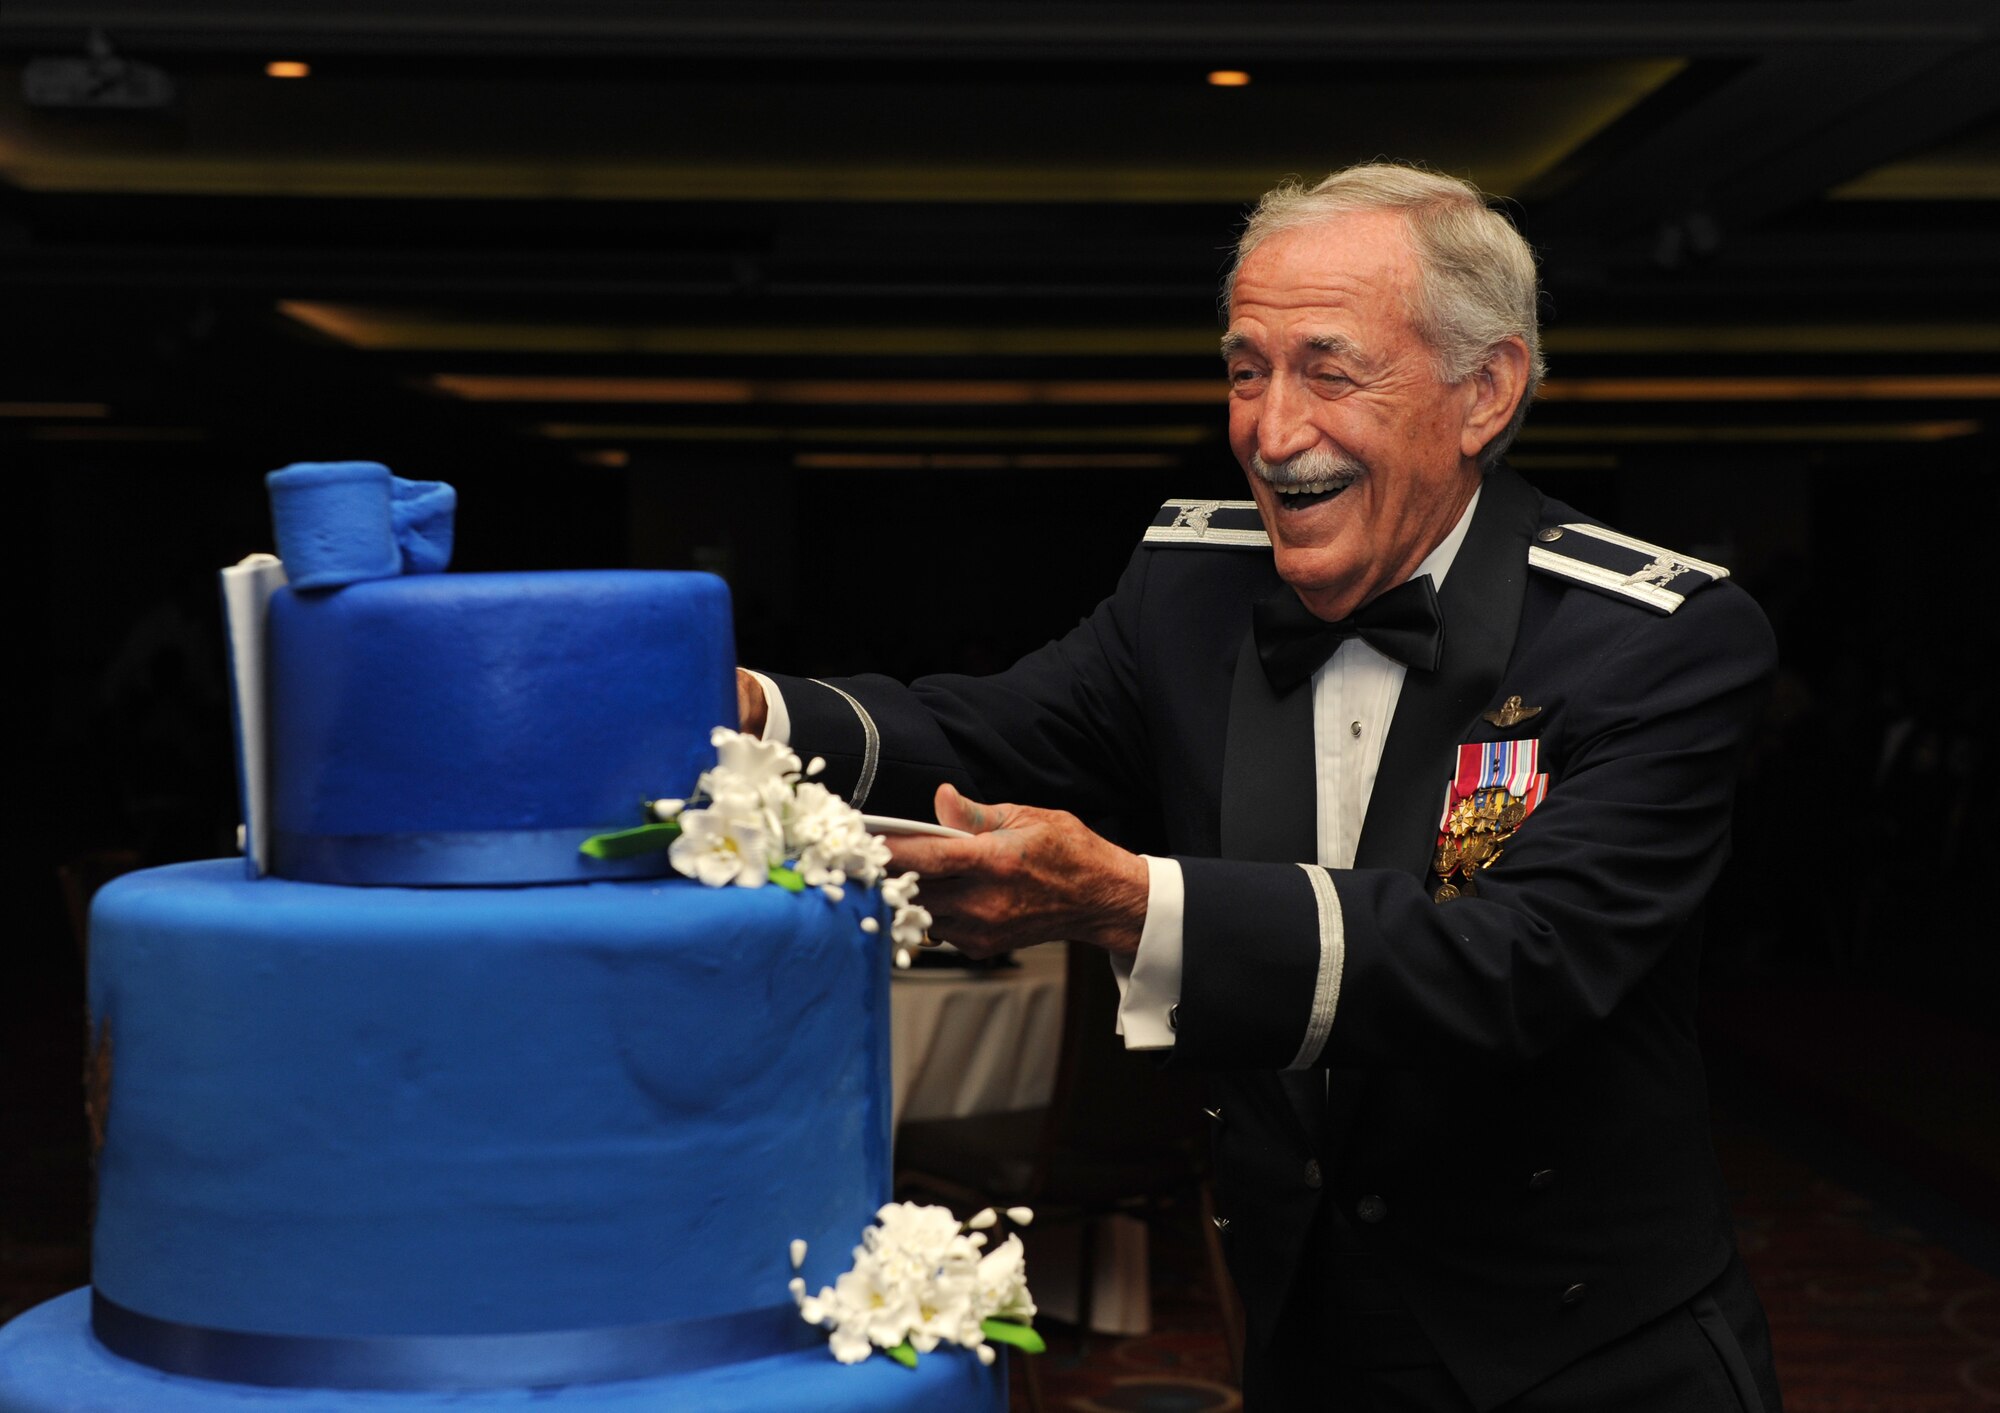 Retired Col. Sid Wright participates in a cake cutting ceremony during the Keesler Air Force Ball at the Imperial Palace Casino Sept. 24, 2016, Biloxi, Miss. Wright was the oldest Airman at the ball; it is tradition for the oldest and youngest Airmen in attendance to cut the cake. The event was sponsored by the Air Force Association John C. Stennis Chapter #332 to celebrate the Air Force’s 69th birthday and the base’s 75th anniversary. (U.S. Air Force photo by Kemberly Groue/Released)